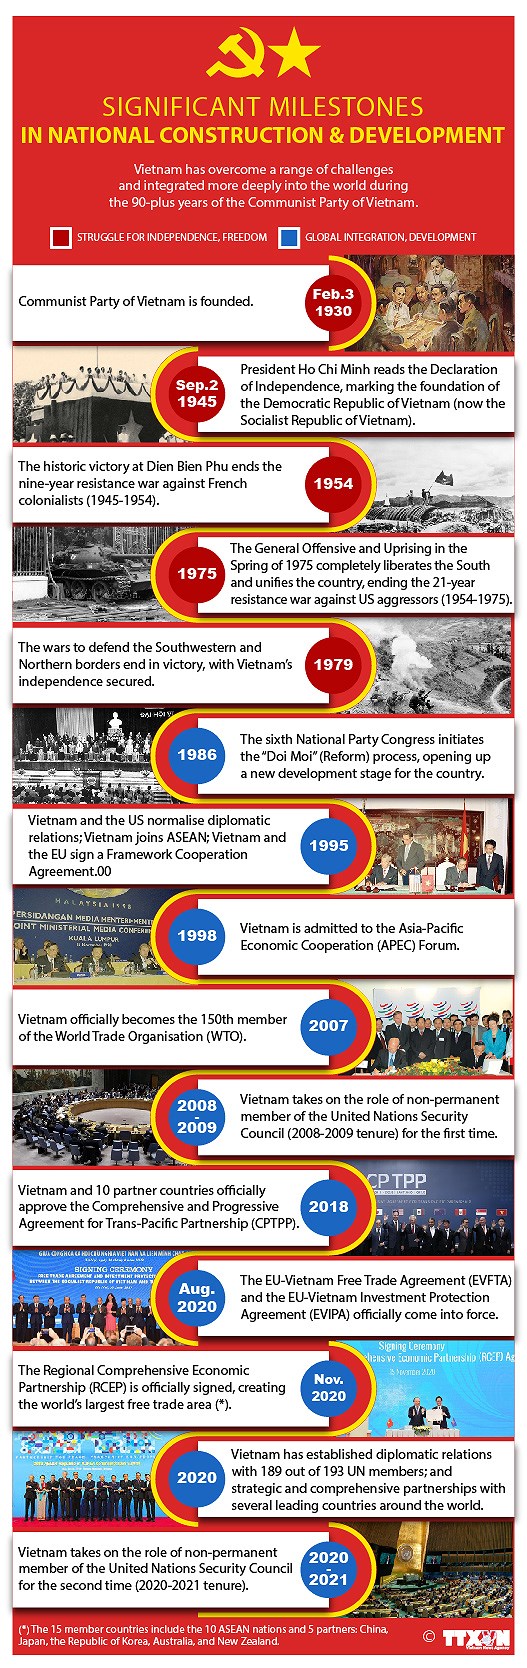 Significant milestones in national construction and development hinh anh 1